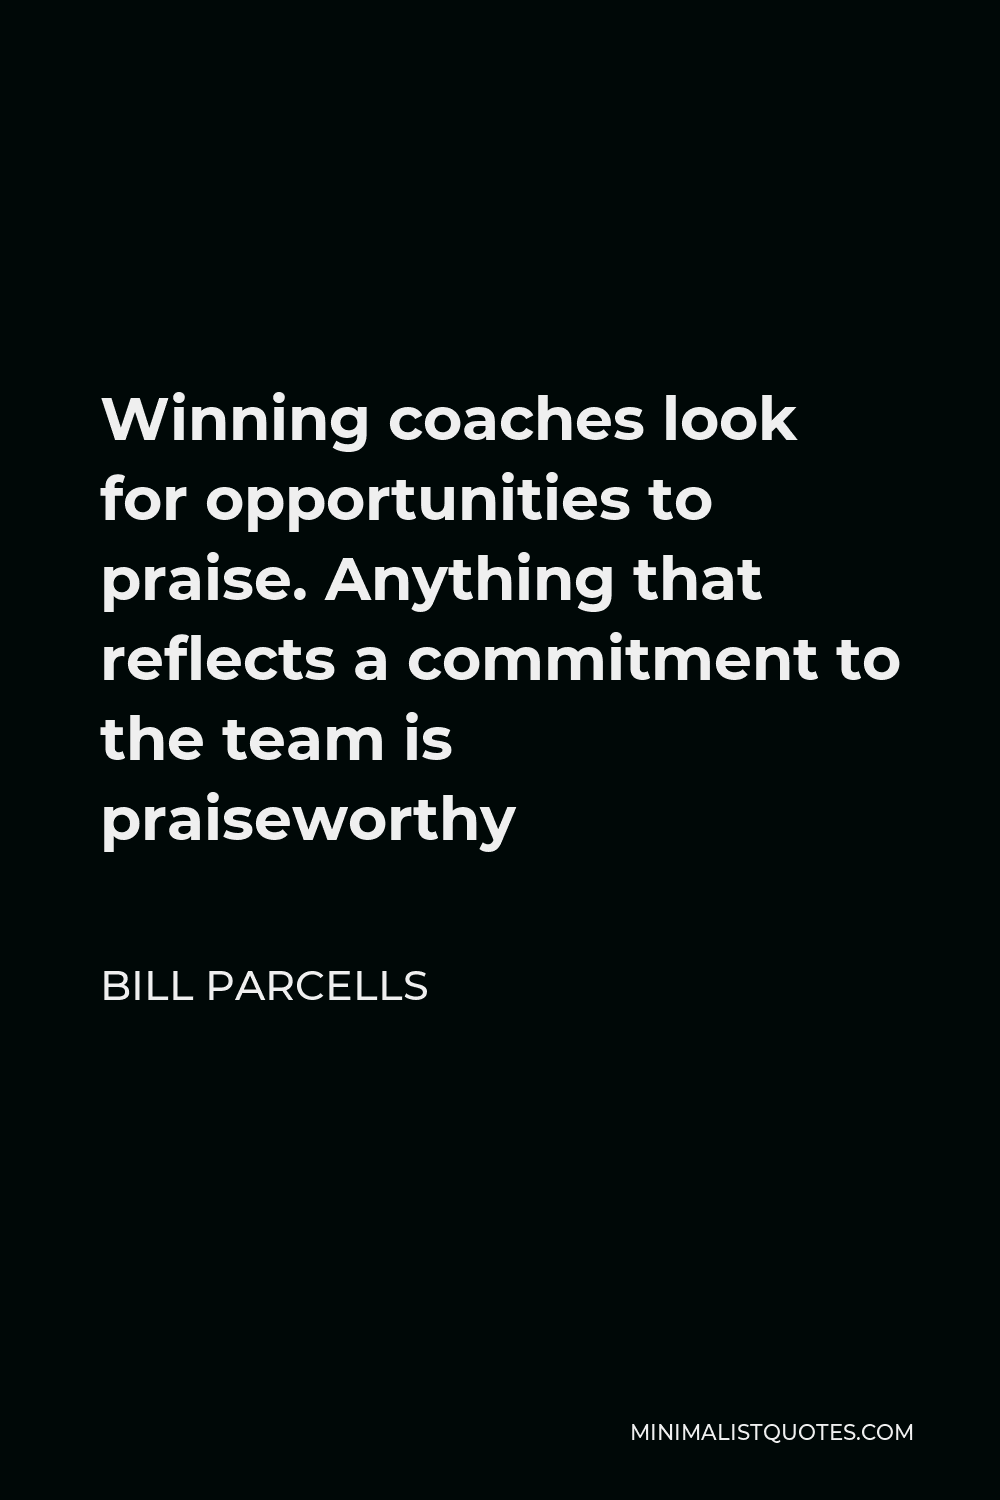 Bill Parcells Quote - Winning coaches look for opportunities to praise. Anything that reflects a commitment to the team is praiseworthy